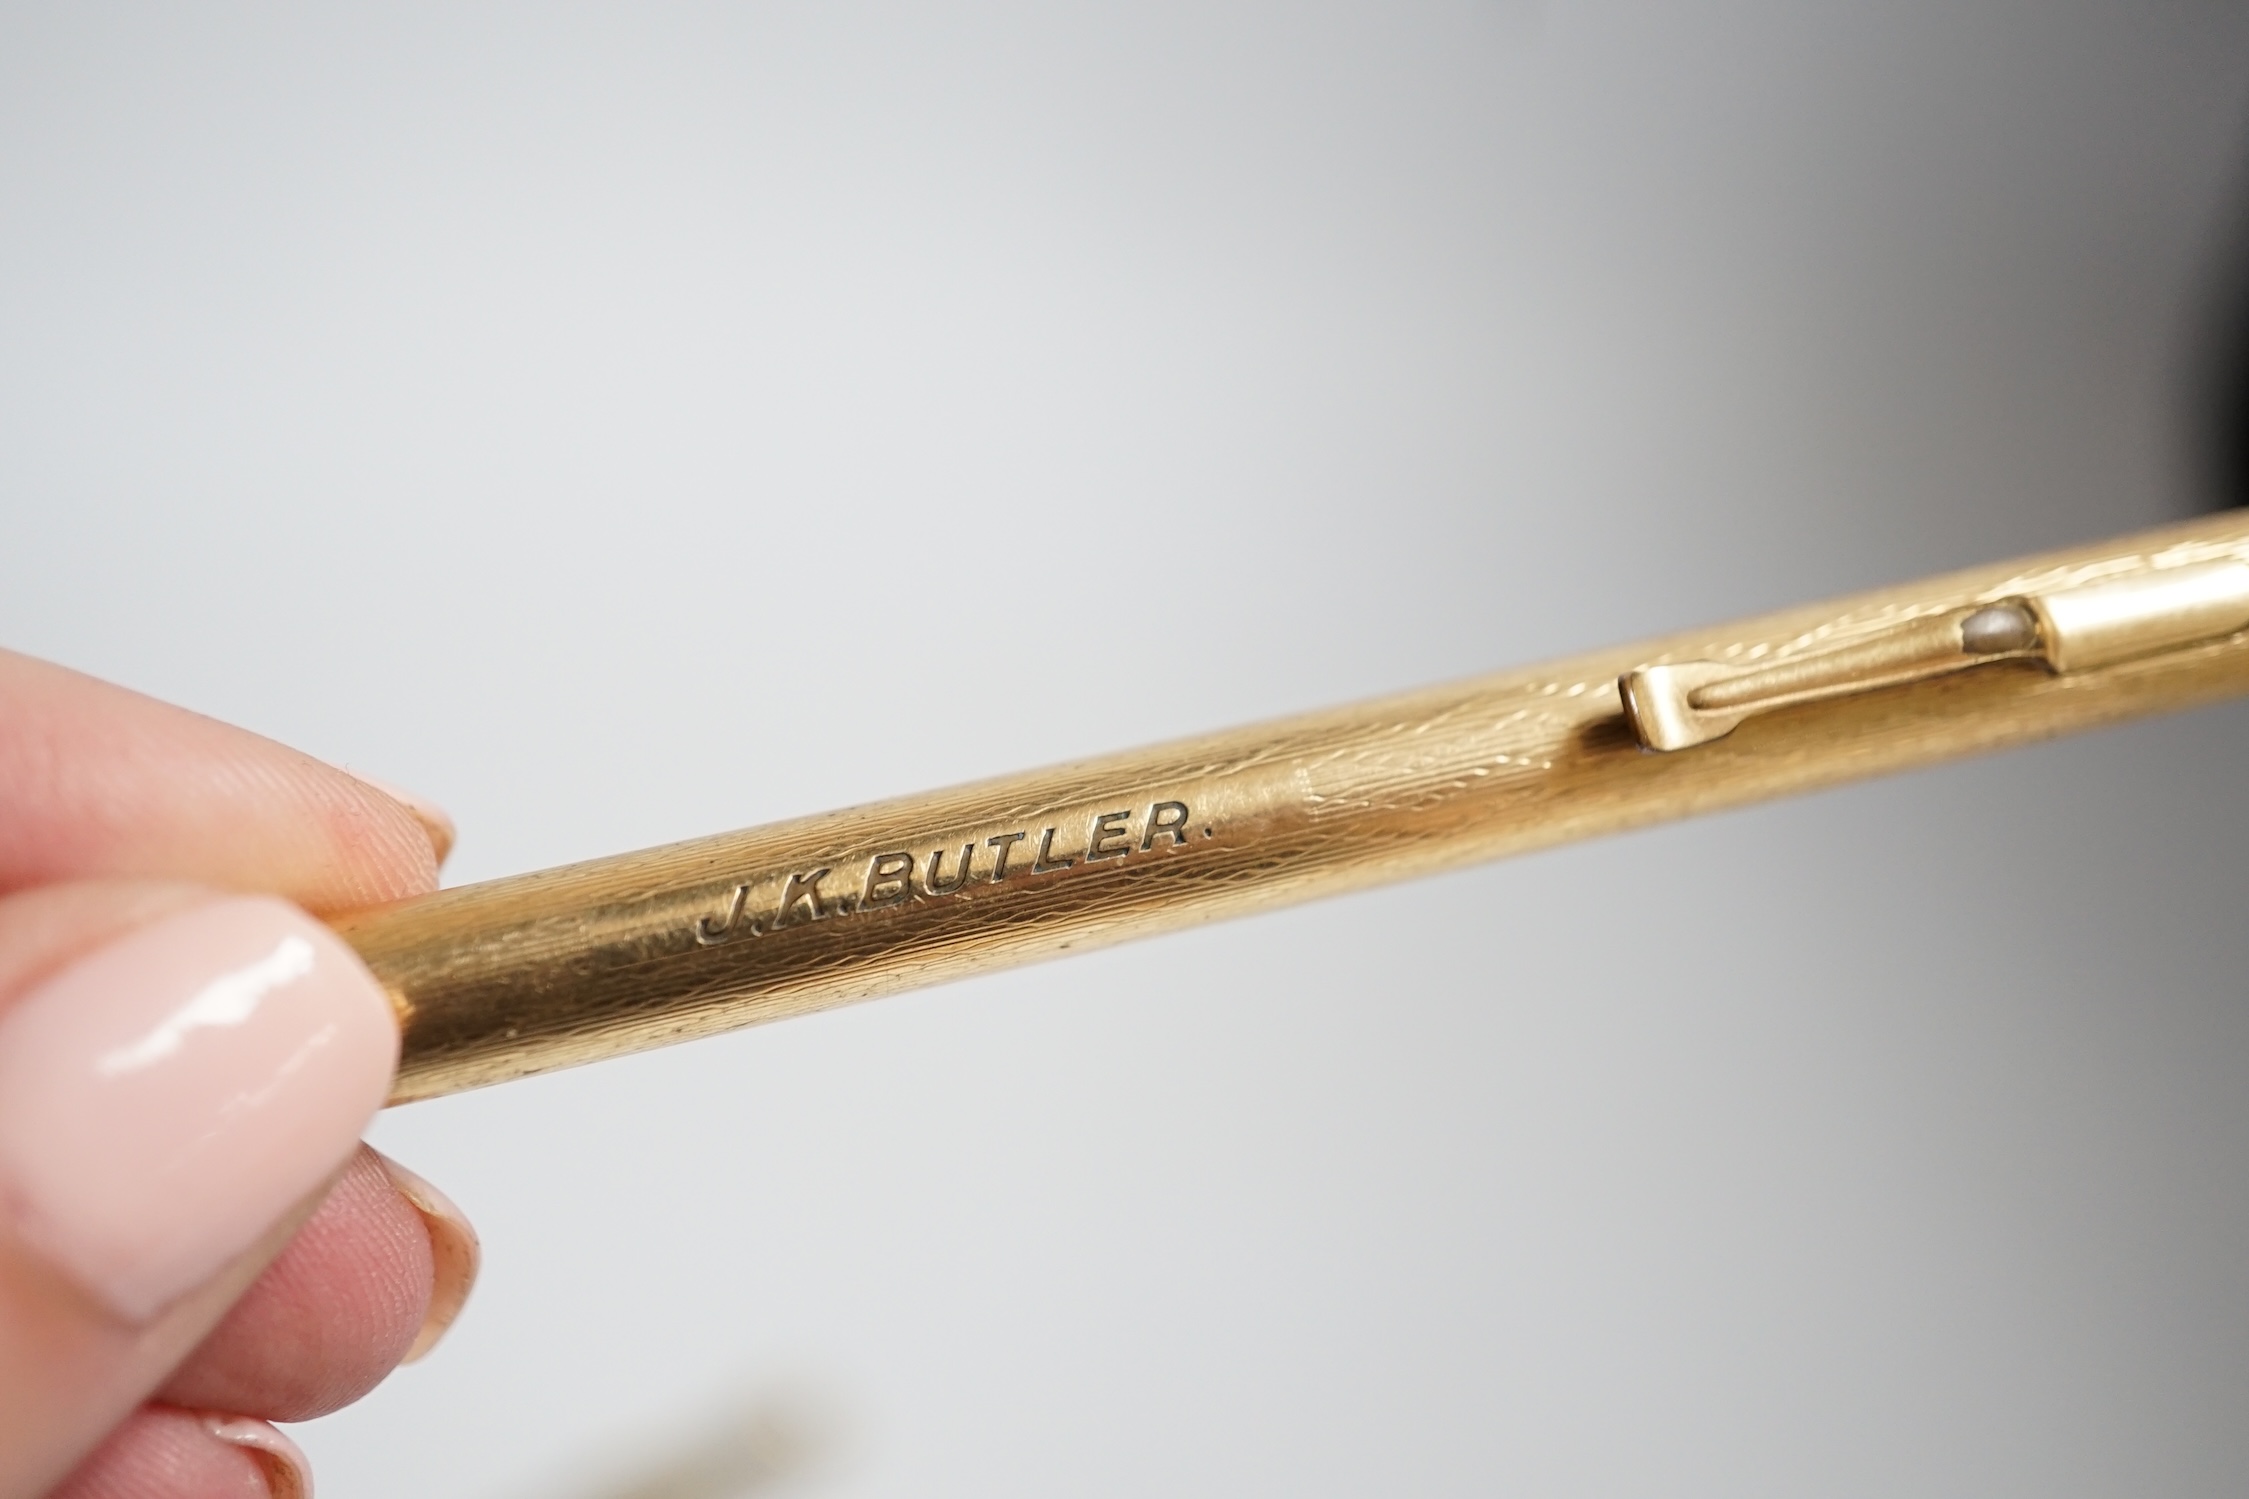 A 9 carat? (marks rubbed) pencil and another rolled gold pencil